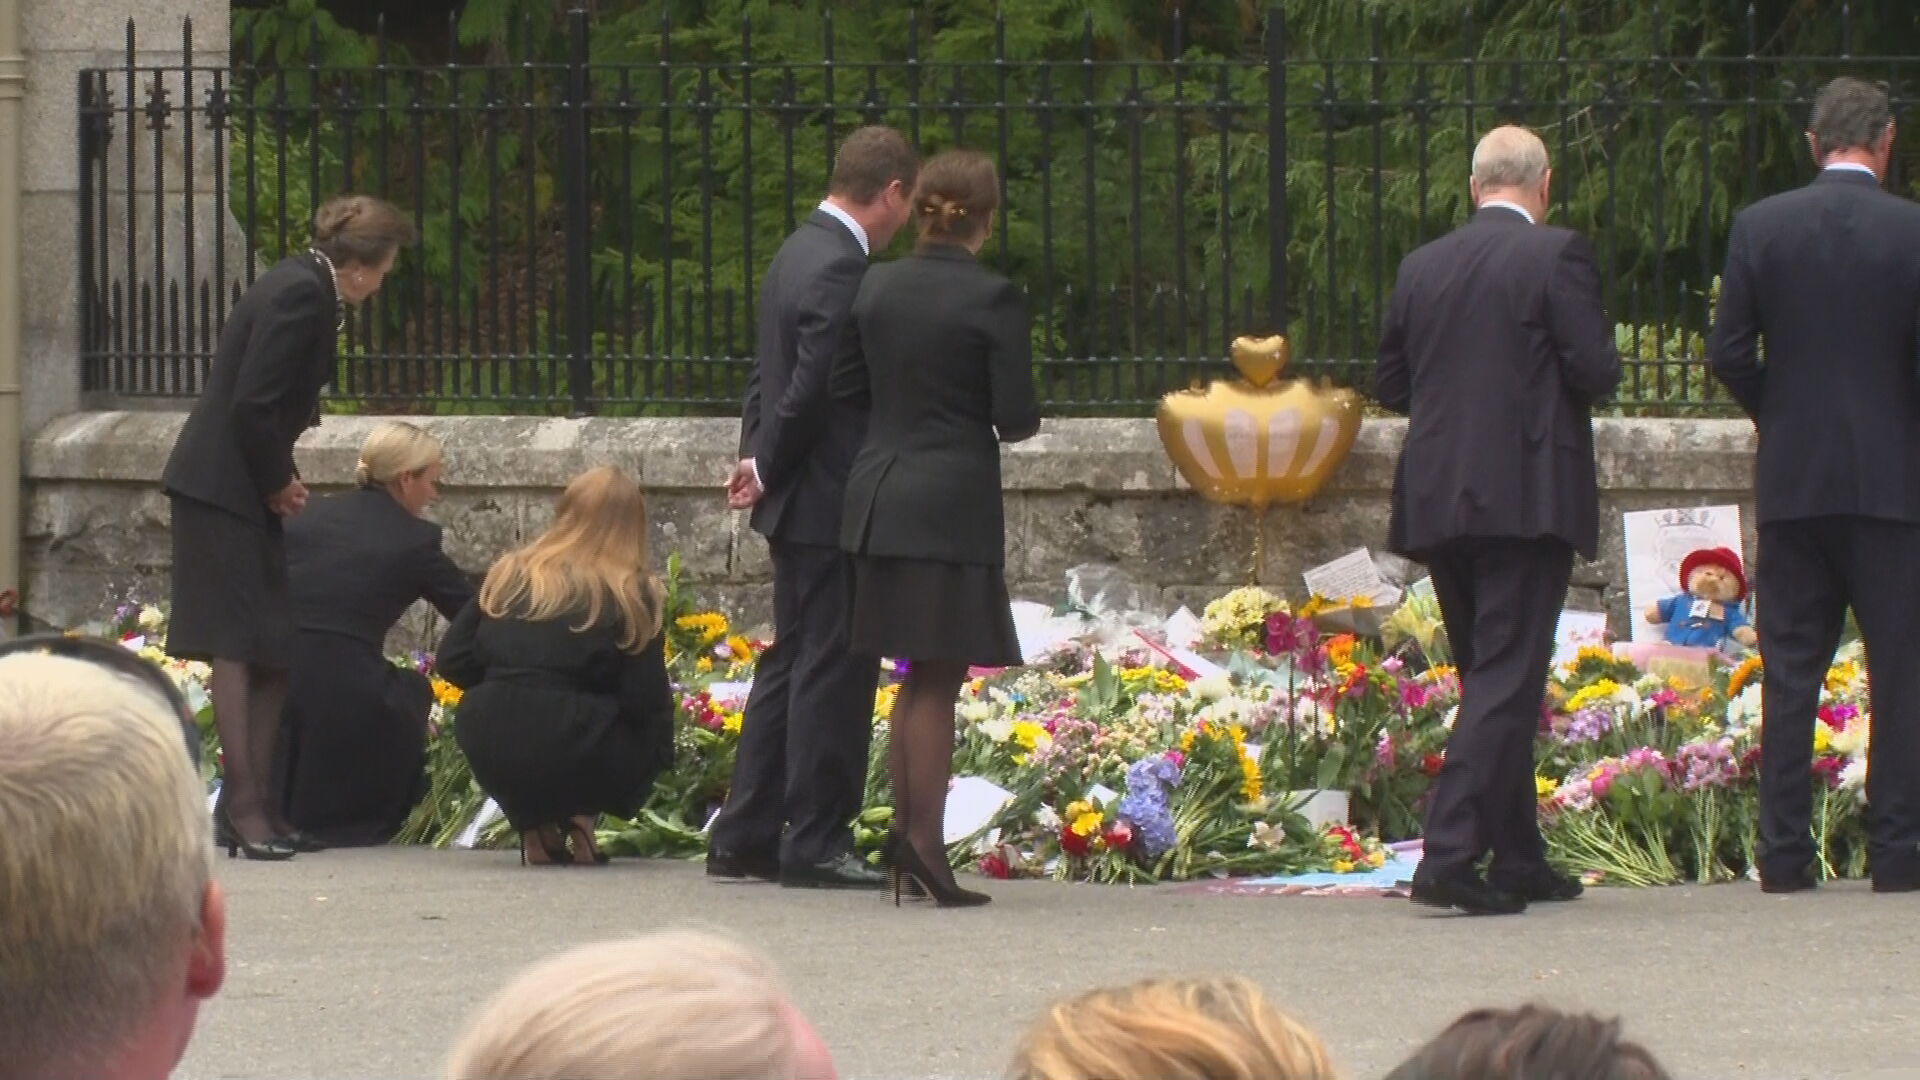 Some members of the family laid their own tributes outside the gates. (Image: ITN)